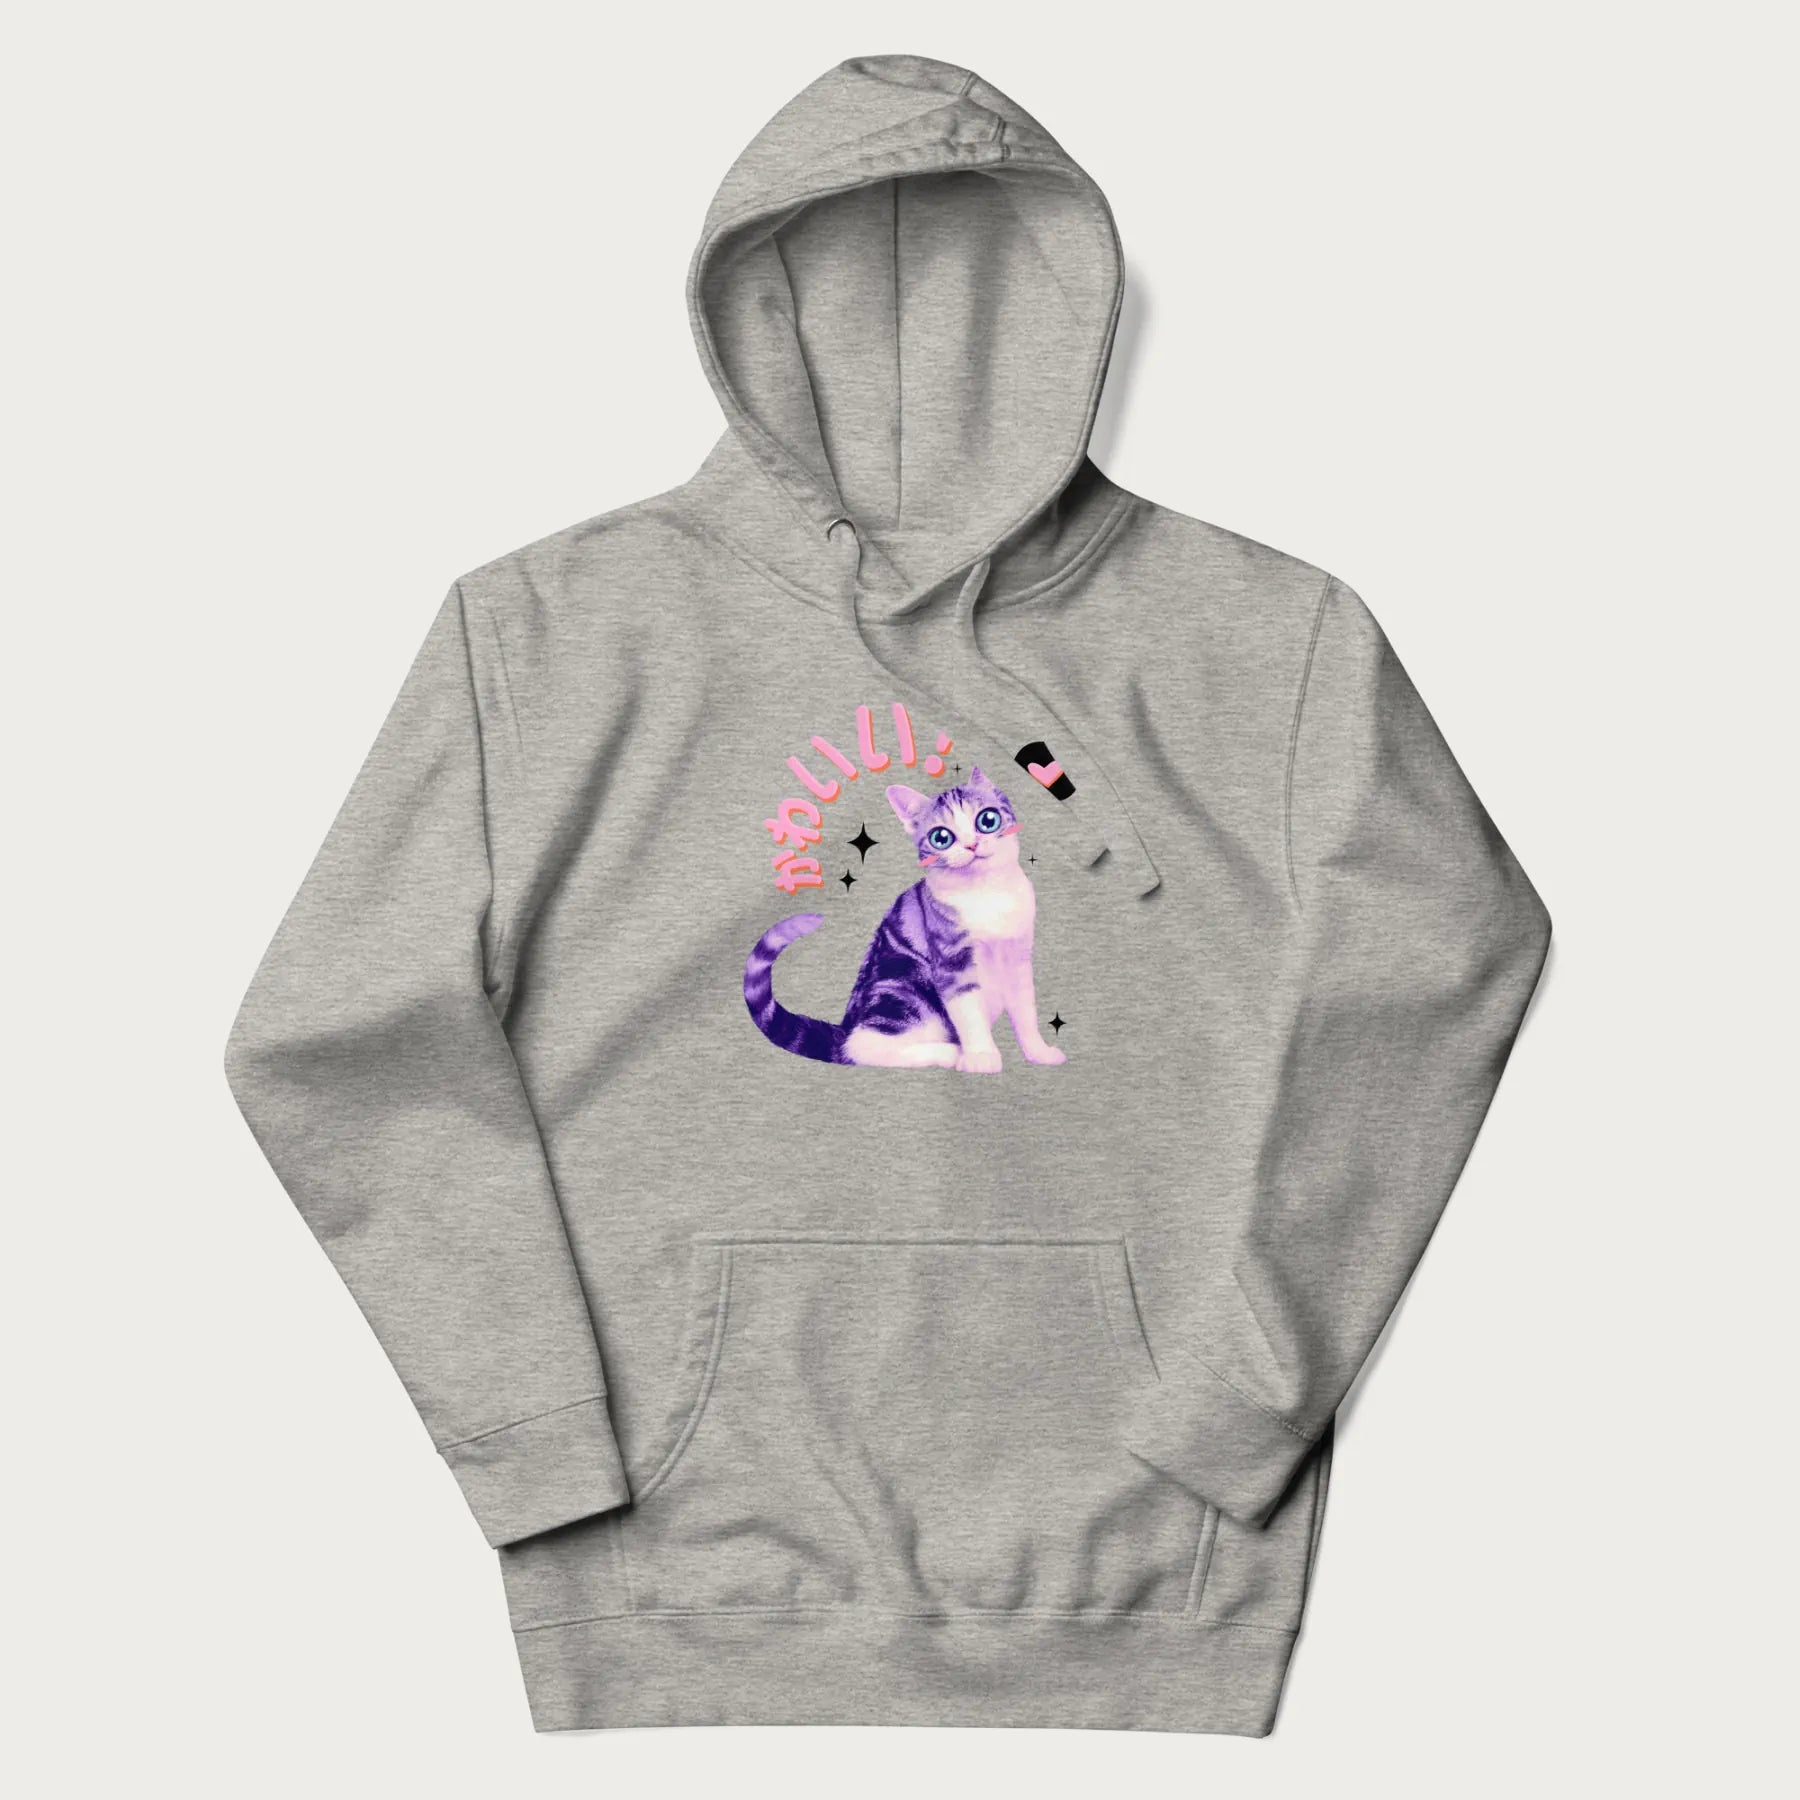 Light grey hoodie with a graphic of a blue-eyed kitten and Japanese kawaii-style lettering, stars, and a heart.